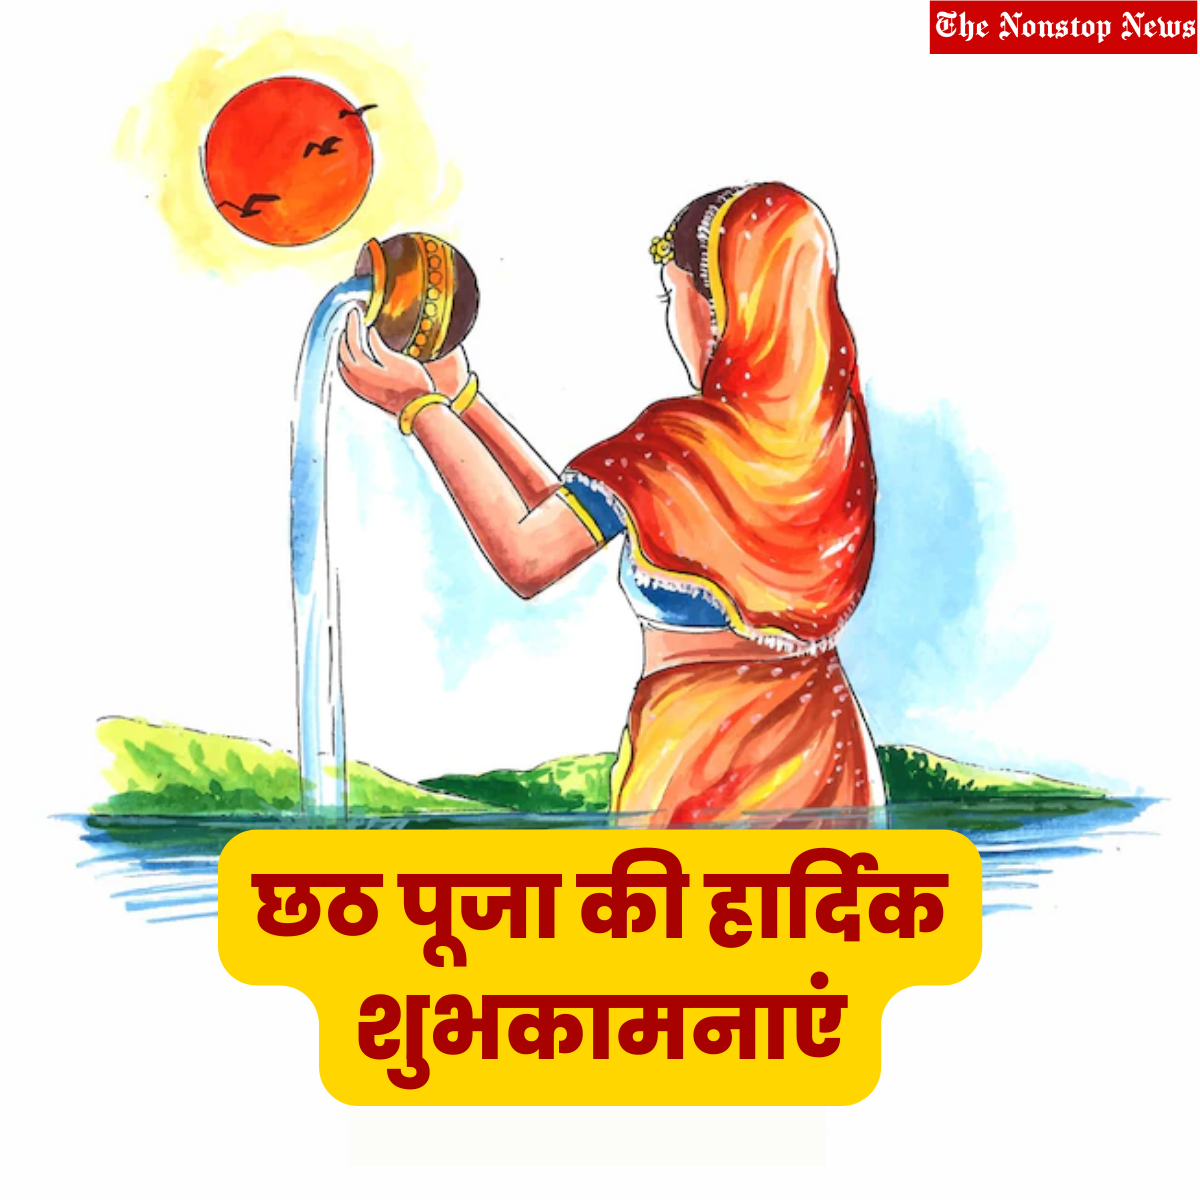 Nahay Khay Chhath Puja Wishes in Hindi 2022 Shayari, Greetings, Messages, Quotes, Background, Posters, Images, Greetings, and Slogans